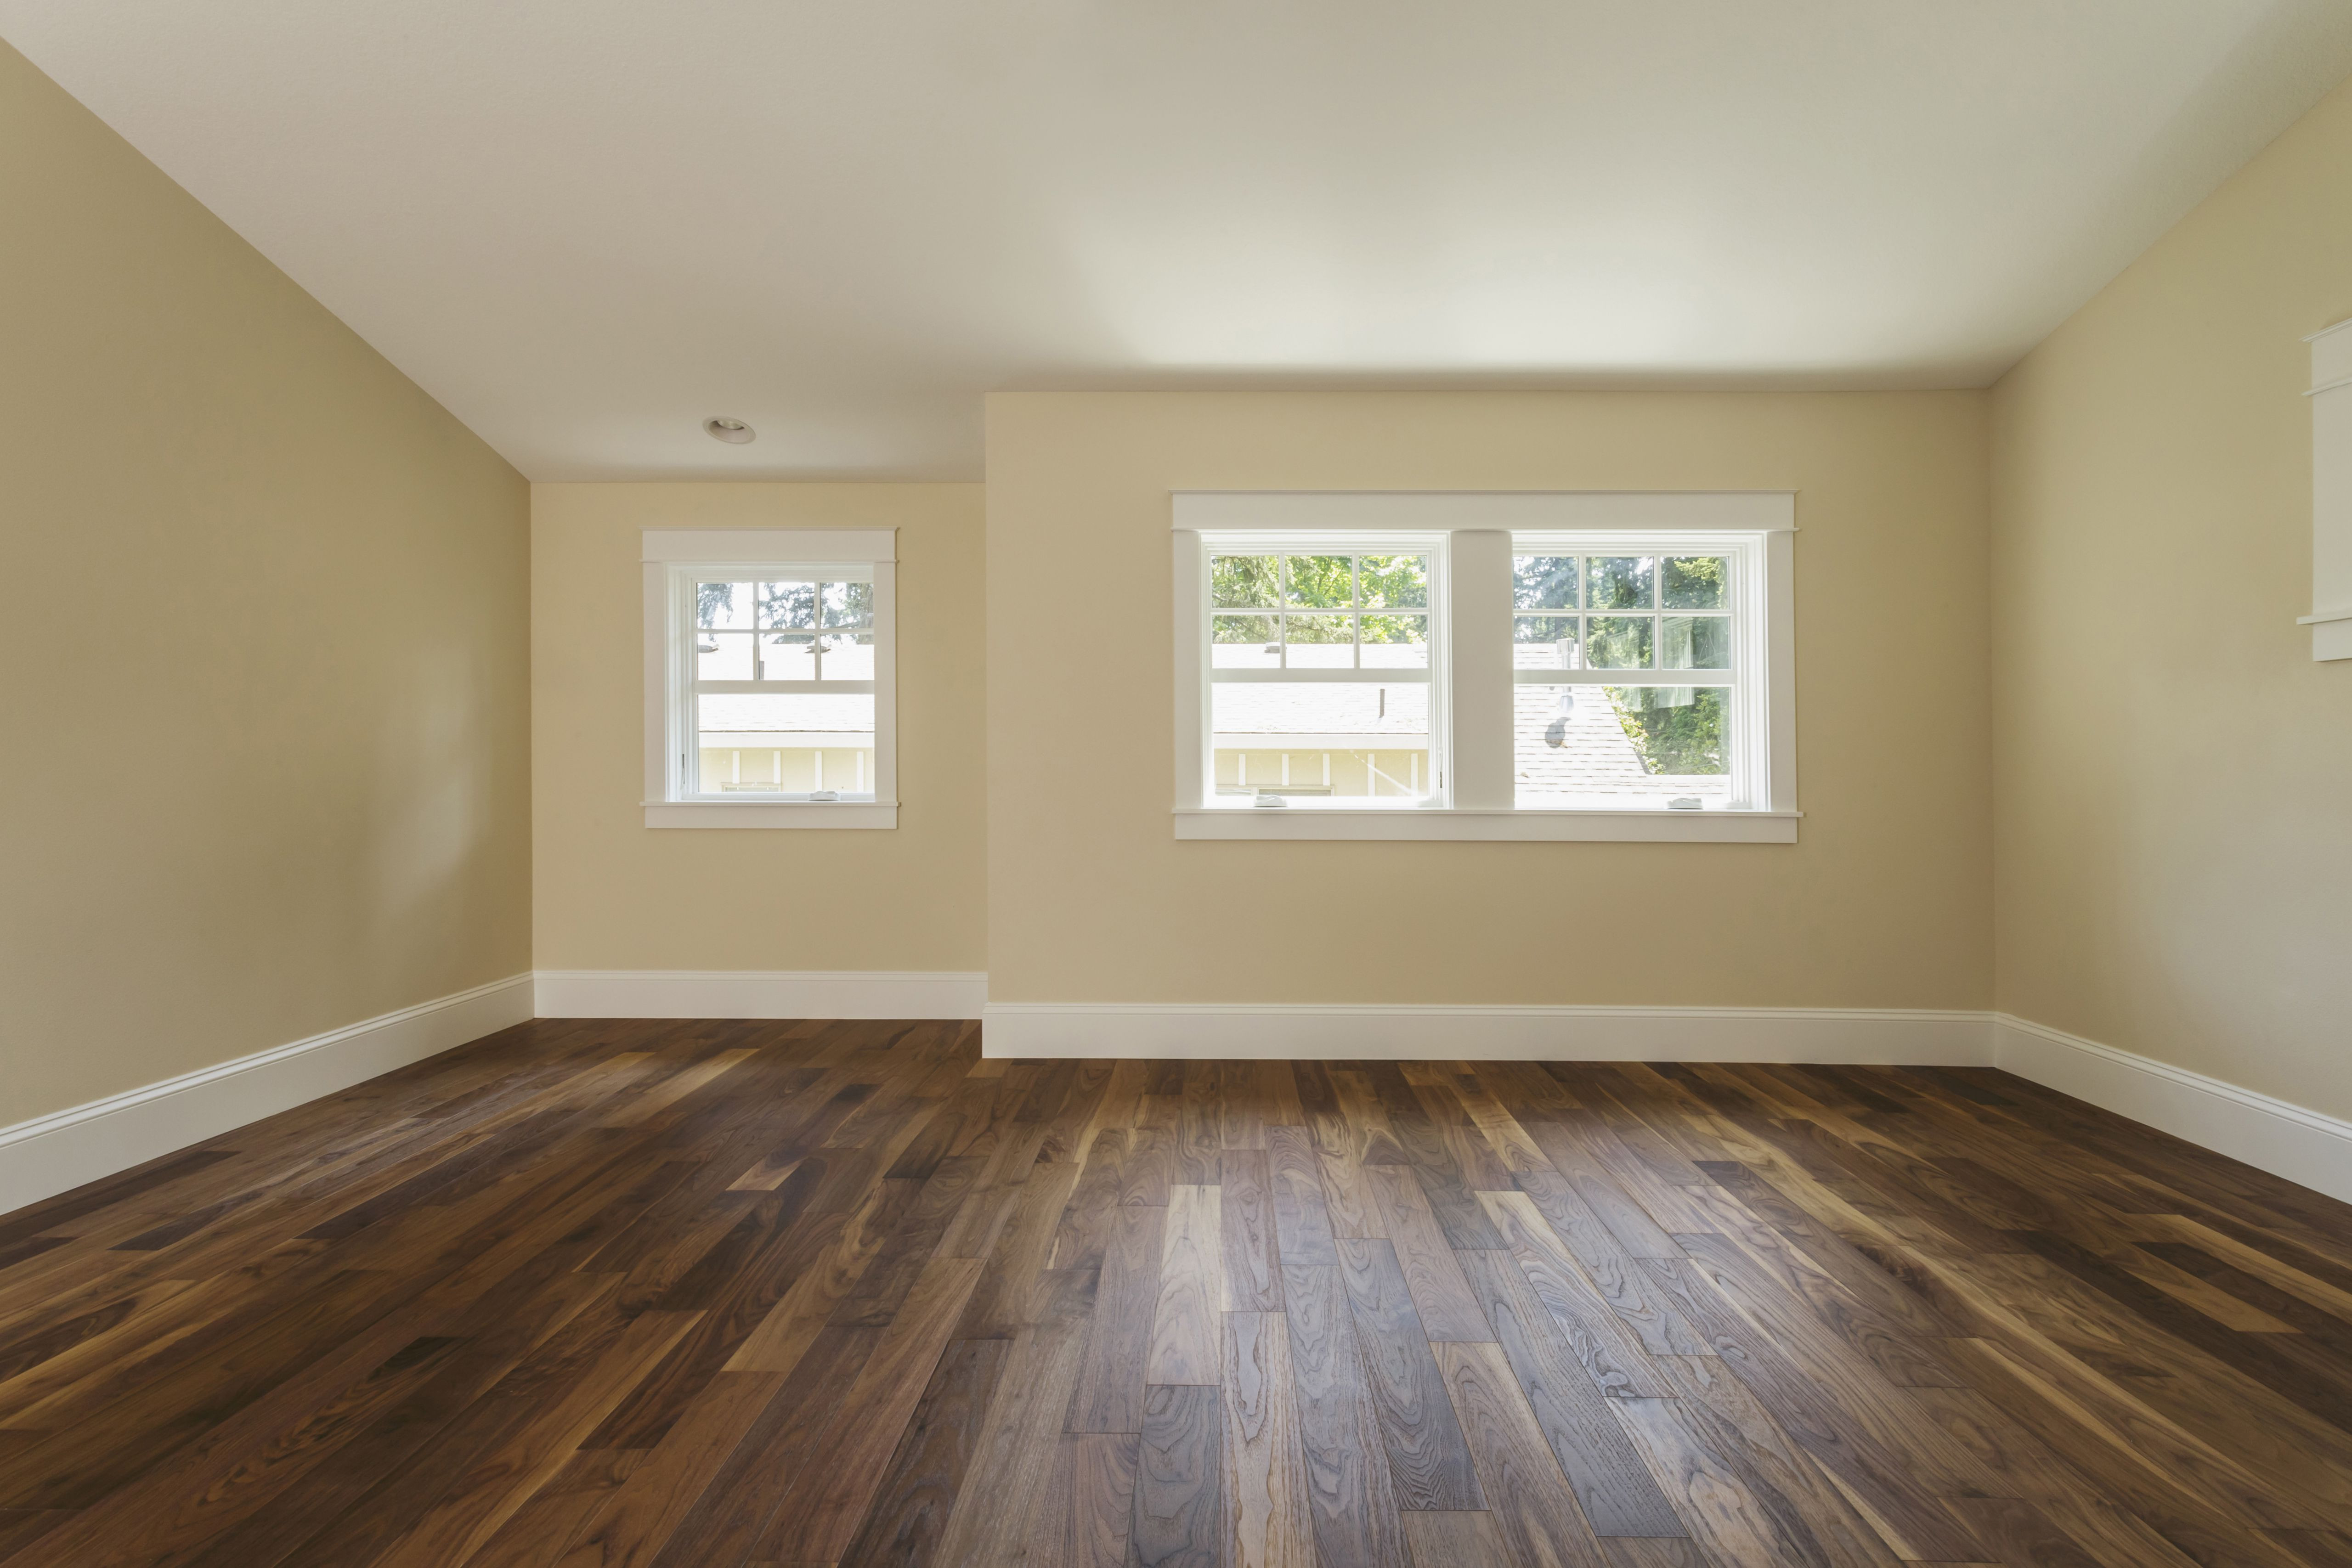 30 Lovely How to Install Hardwood Floors Video 2024 free download how to install hardwood floors video of its easy and fast to install plank vinyl flooring within wooden floor in empty bedroom 482143001 588bd5f45f9b5874eebd56e9